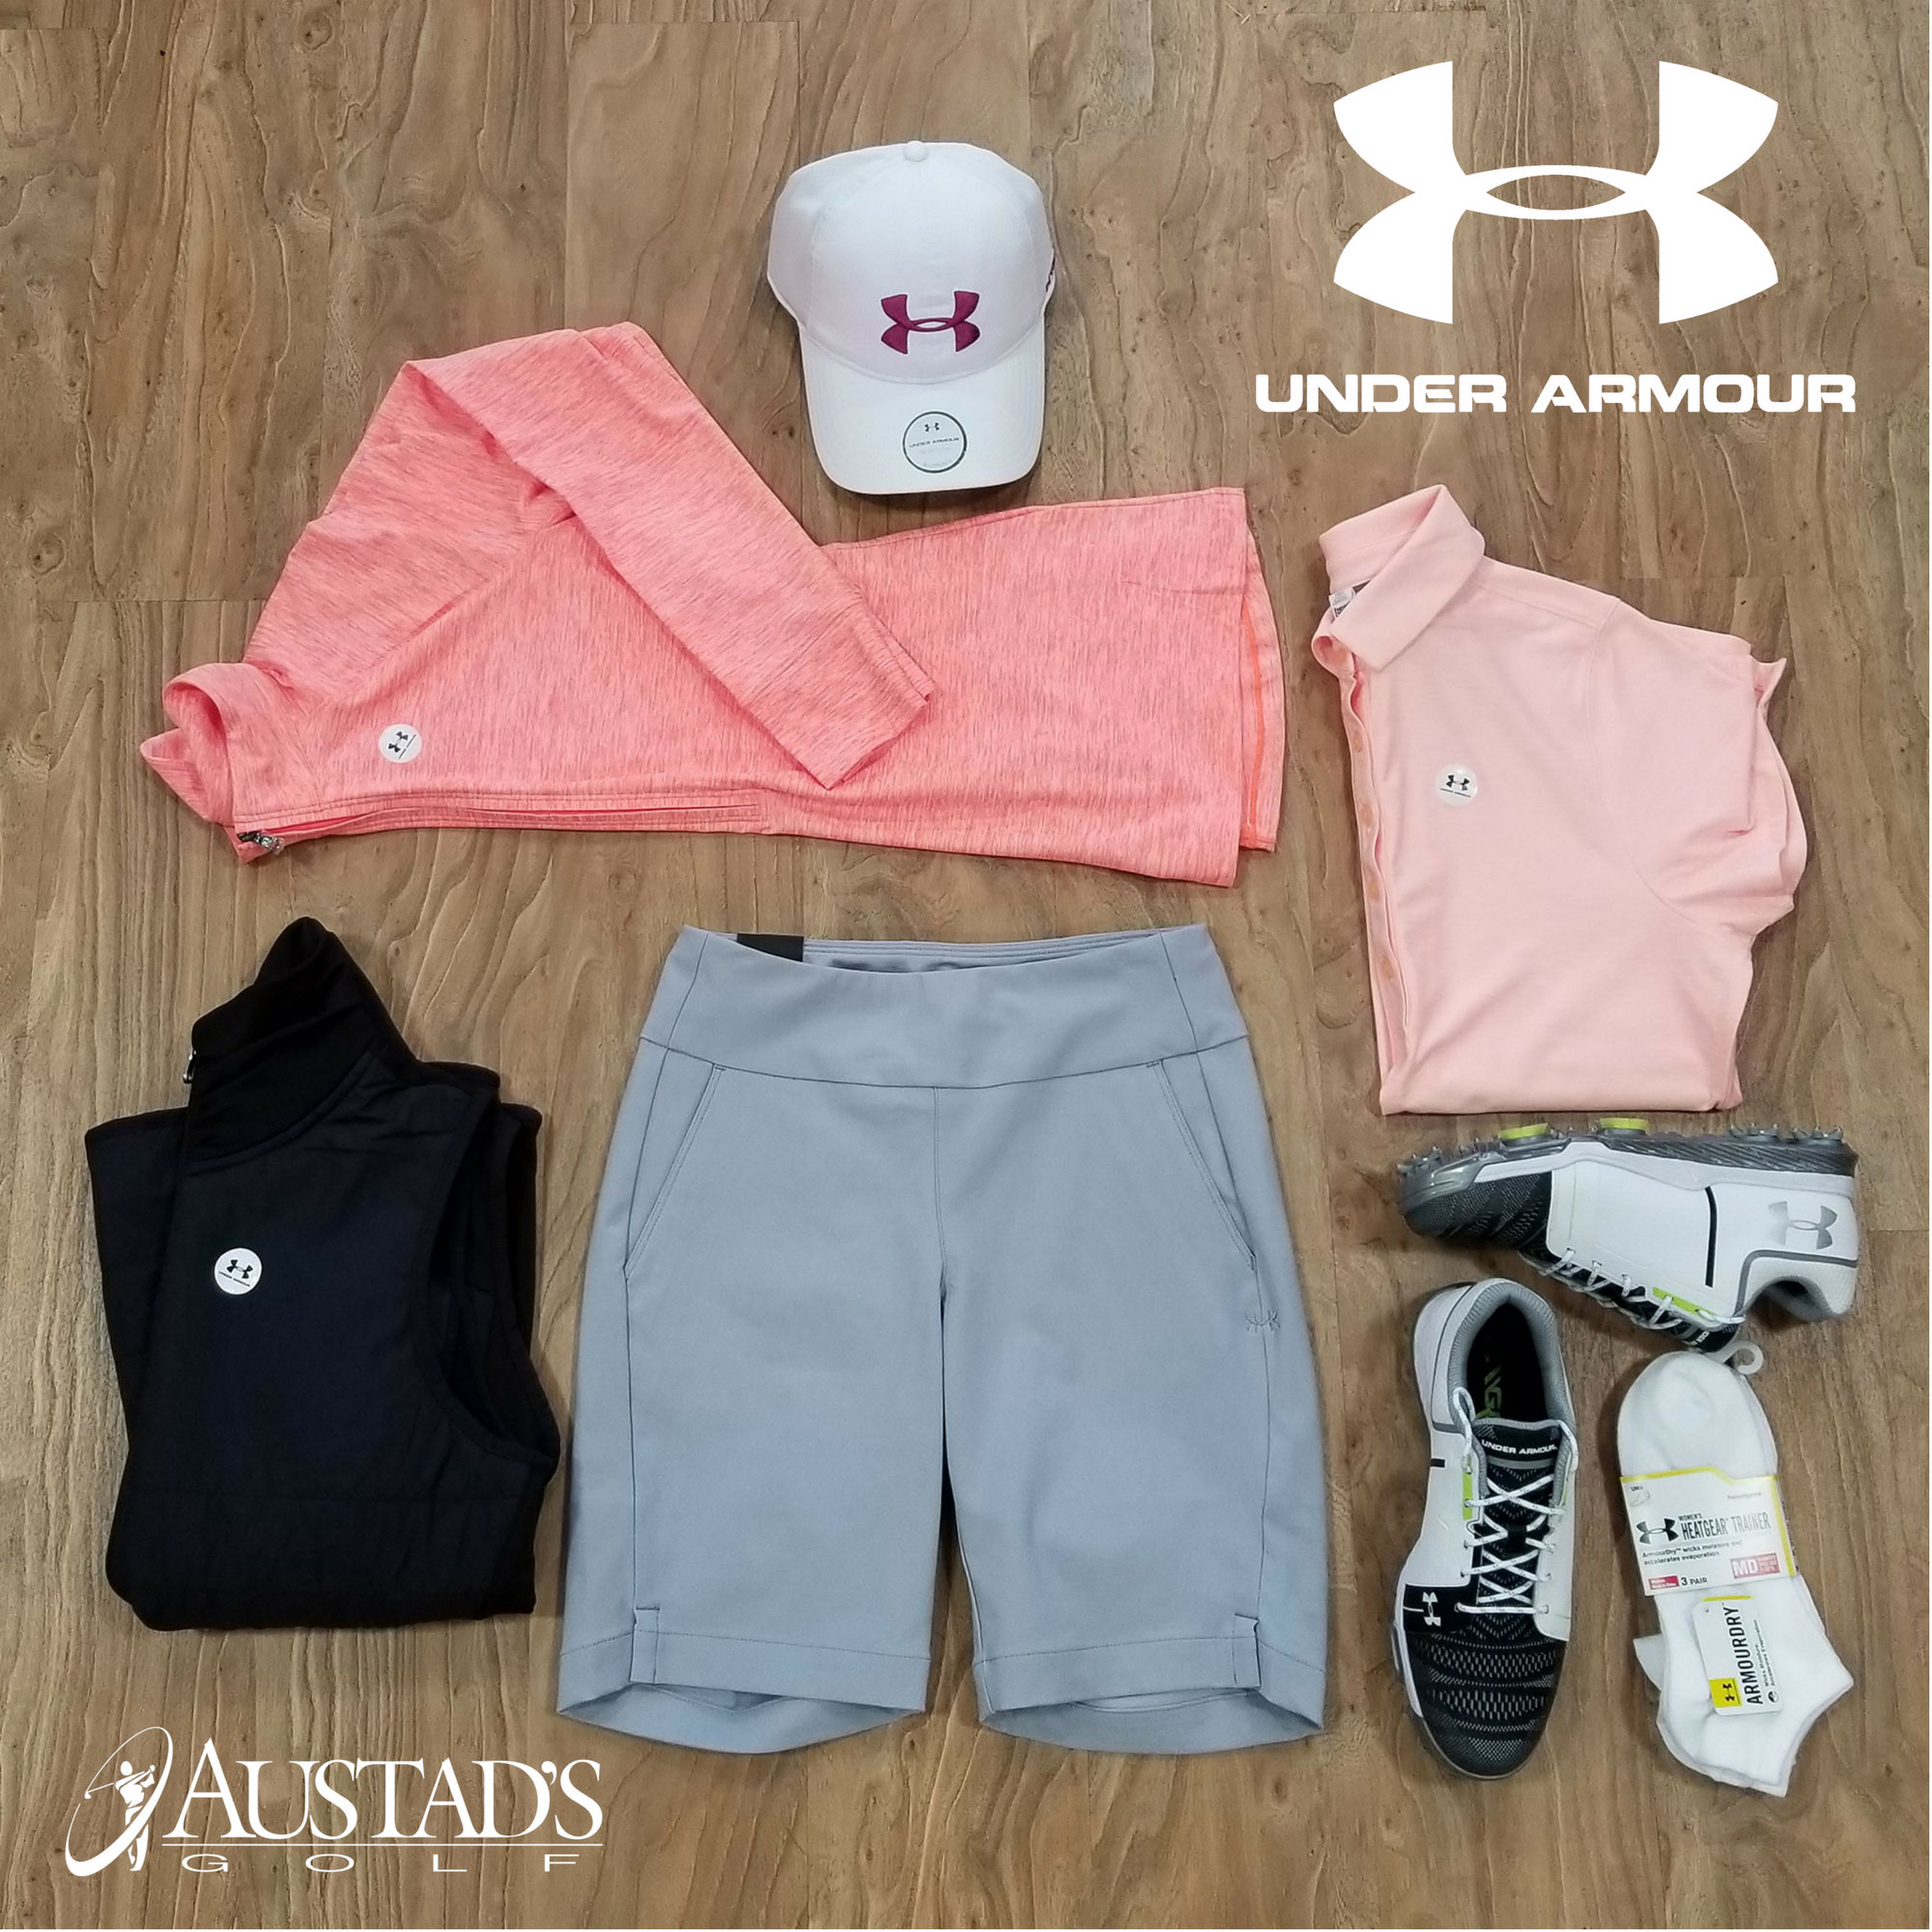 Under Armour Women's Collection 1